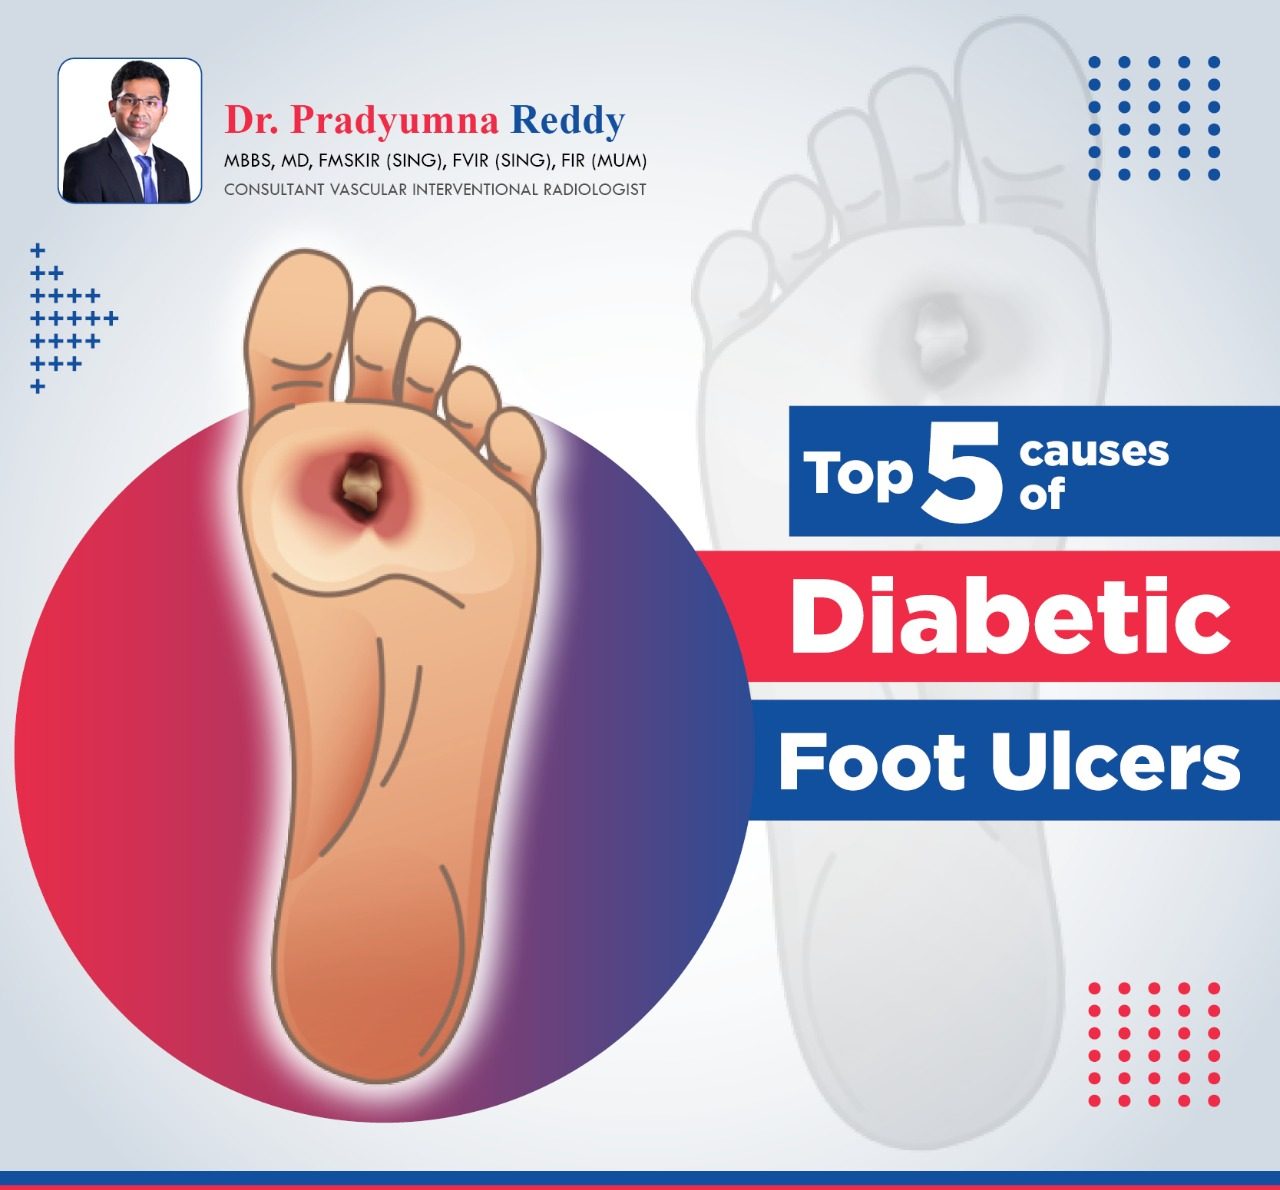 Hyperglycemic crisis and diabetic foot ulcers